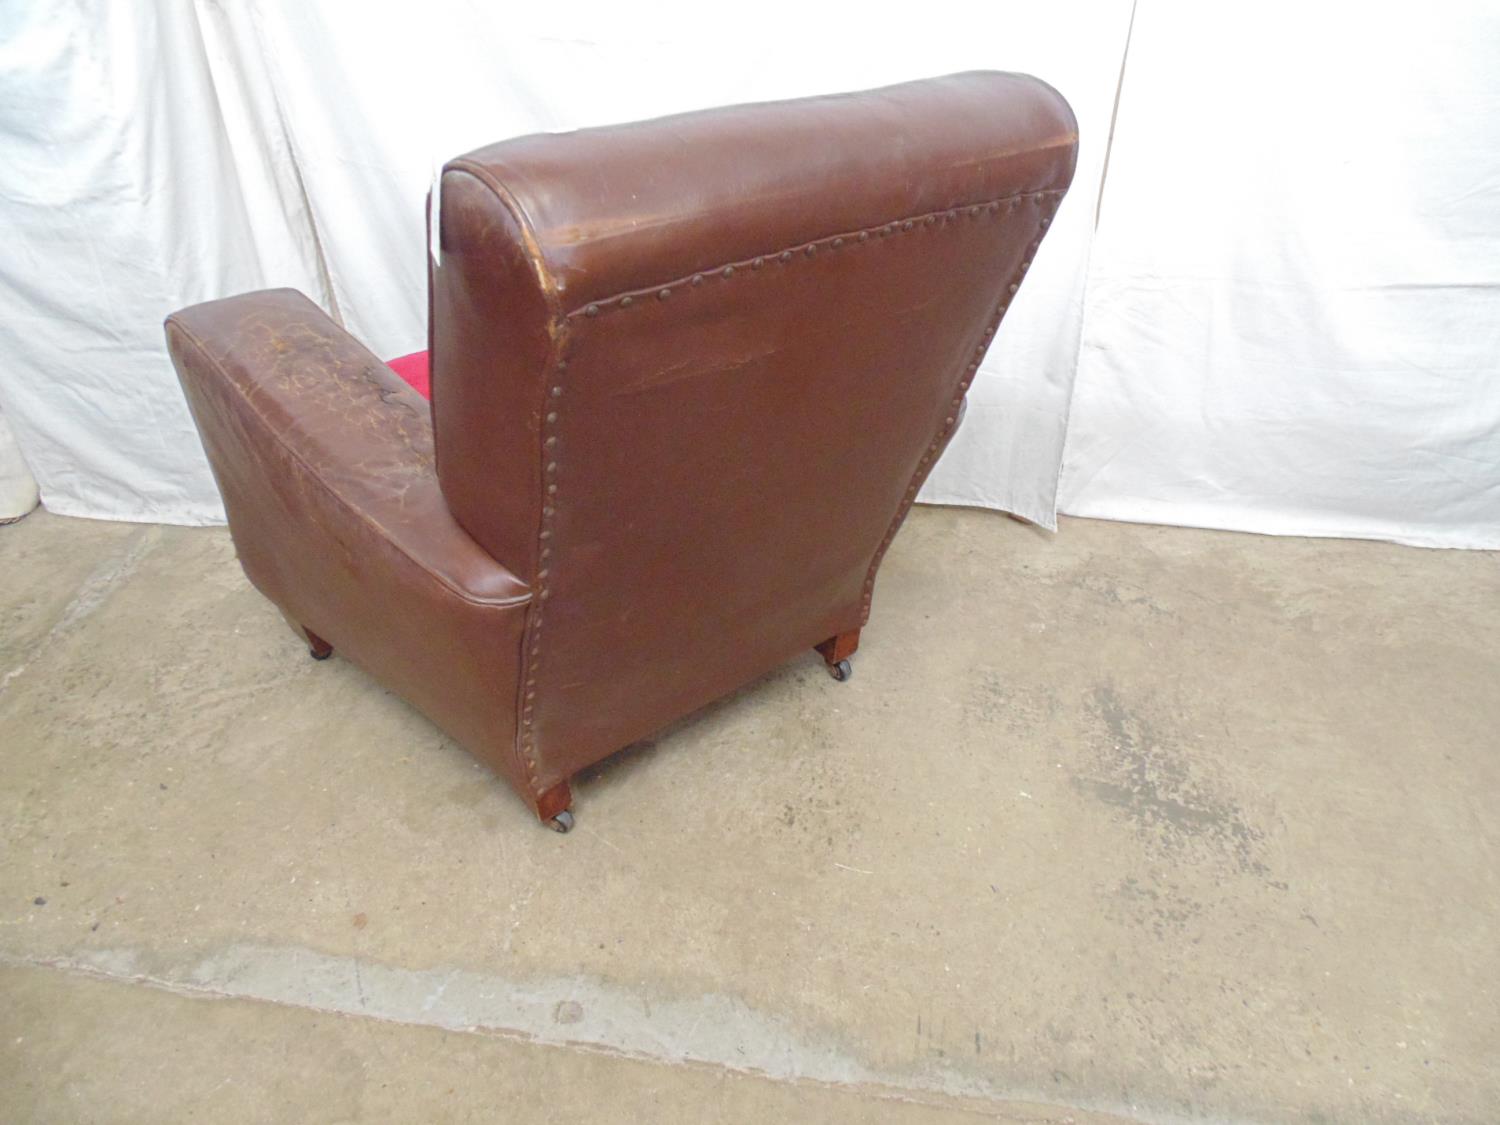 Brown leather club chair with red cushion, standing on block feet and castors (af) - 84cm x 72cm x - Image 5 of 5